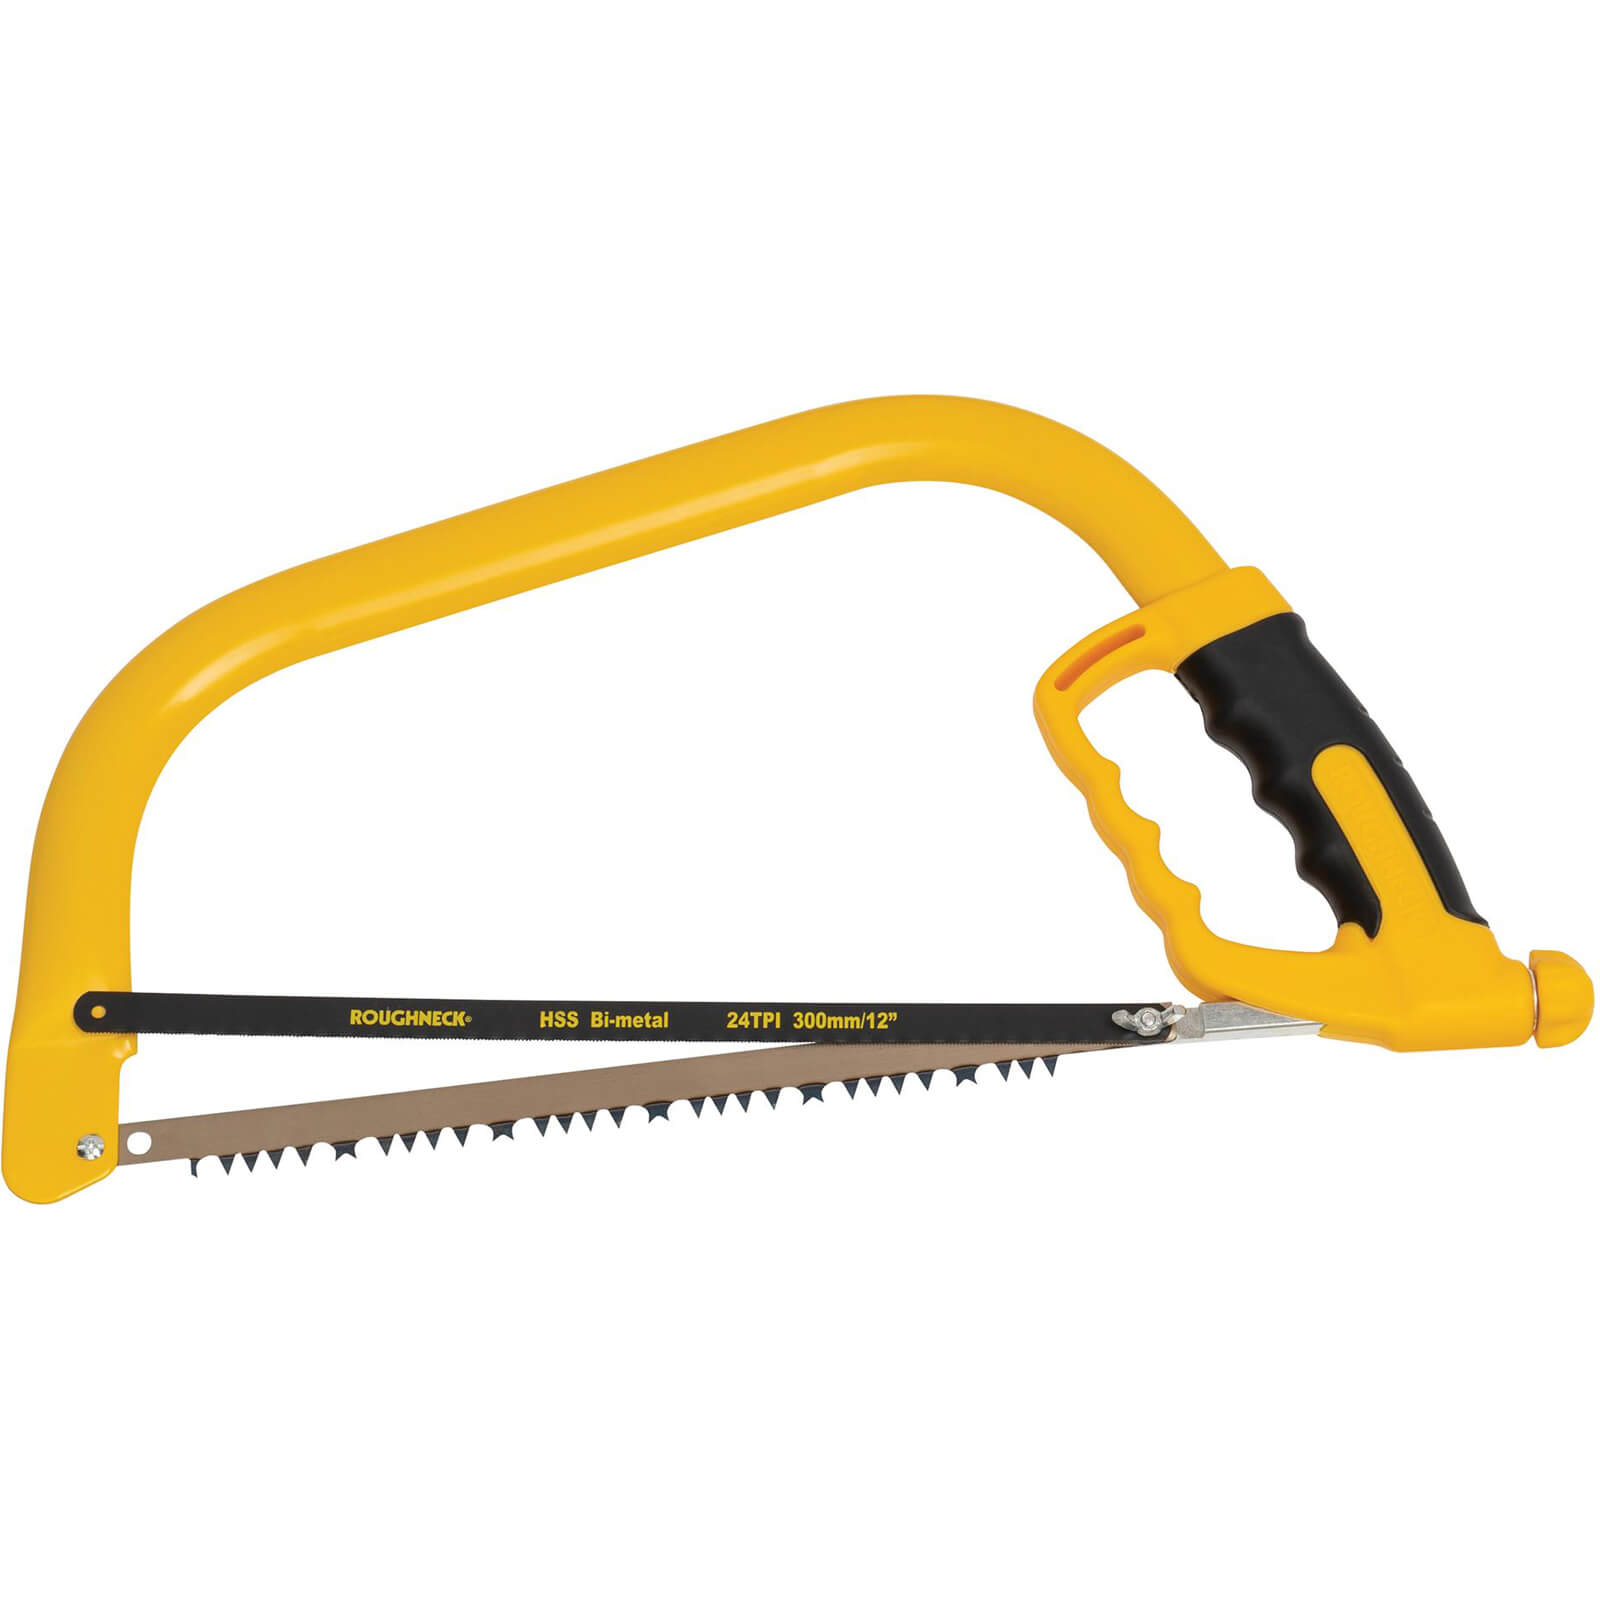 Image of Roughneck Bow Saw with Soft Grip Handle 12" / 300mm